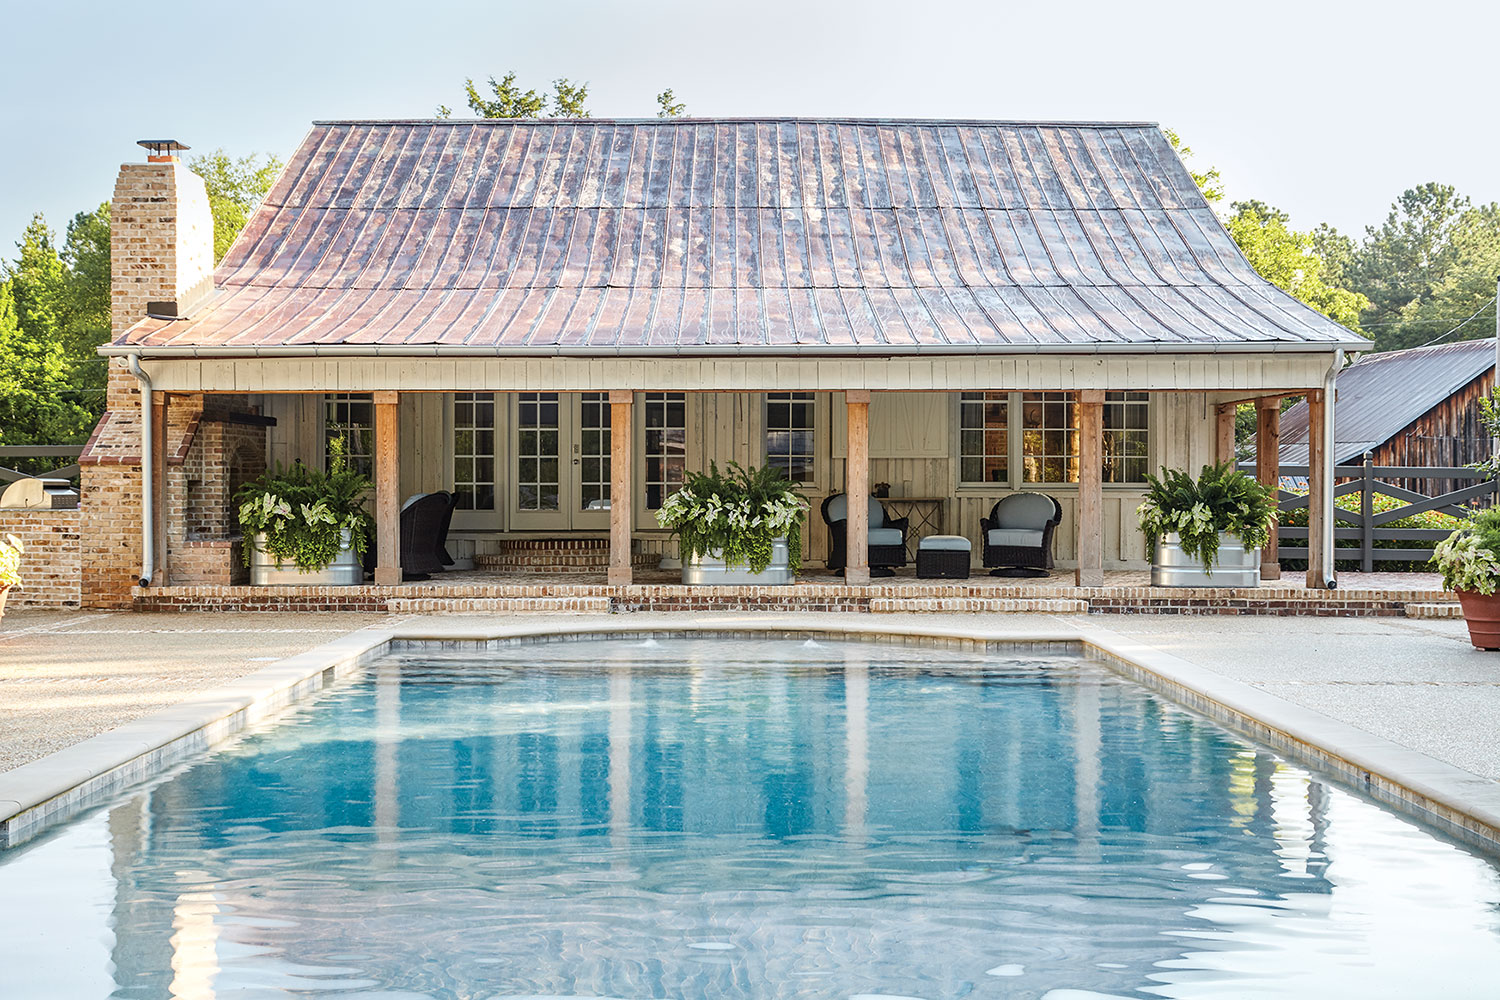 A large blue pool leads the covered brick porch the pool house, which features a weathered metal roof